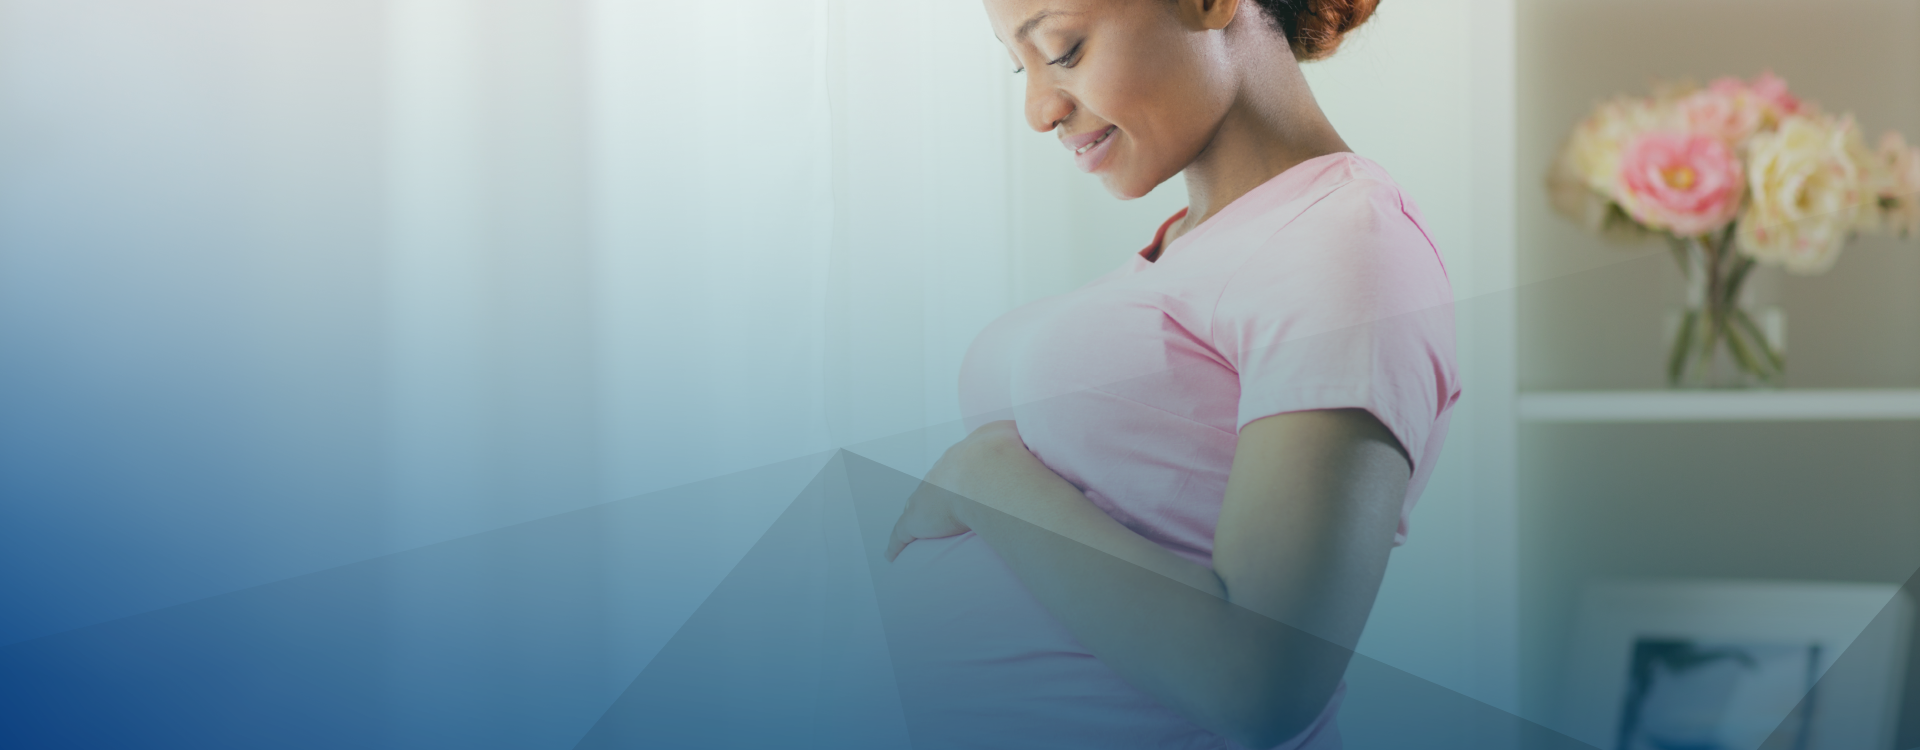 Ask the OBGYN: How Does COVID-19 Impact My Pregnancy?  